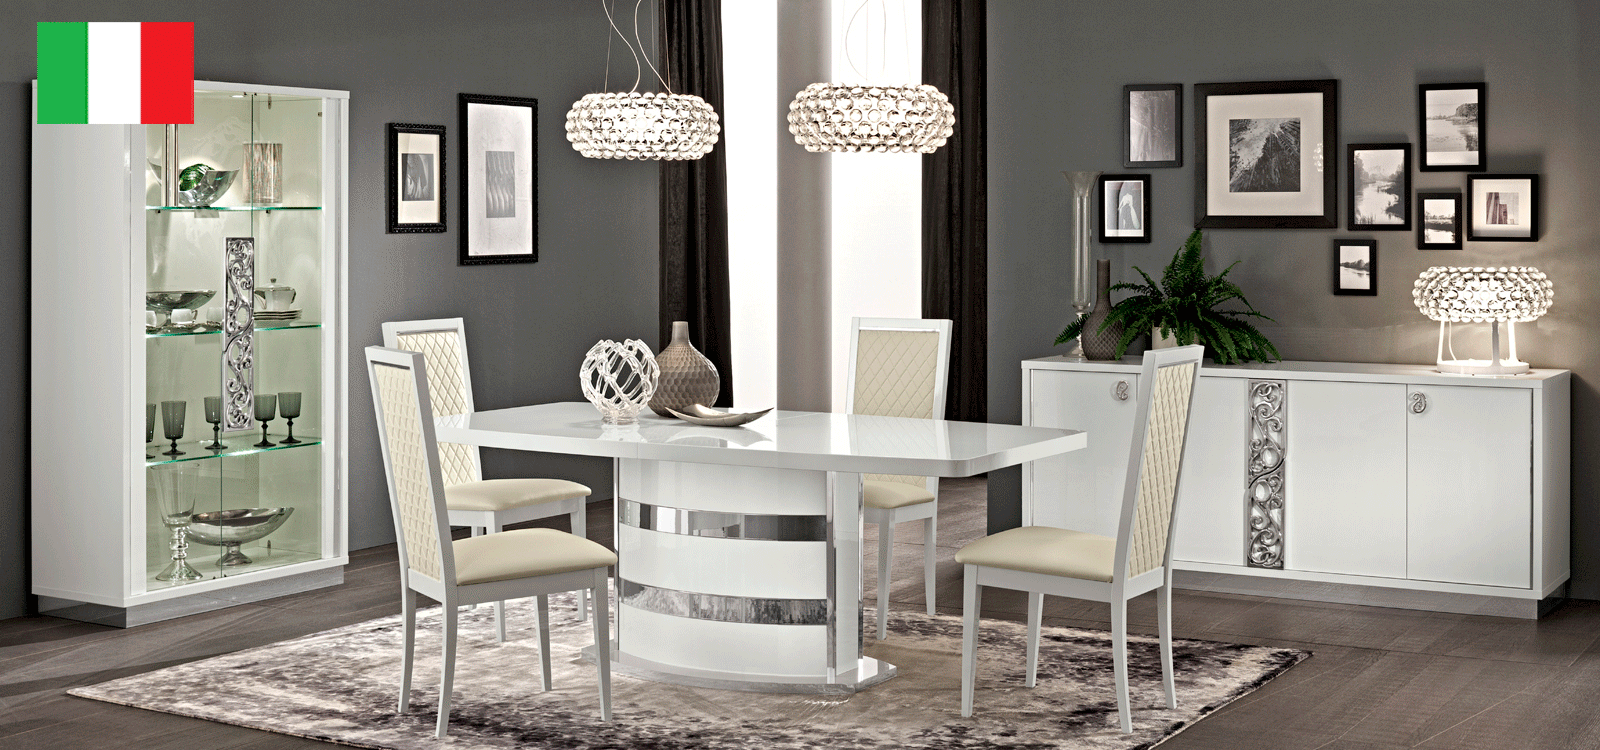 Clearance Dining Room Roma Dining White, Italy